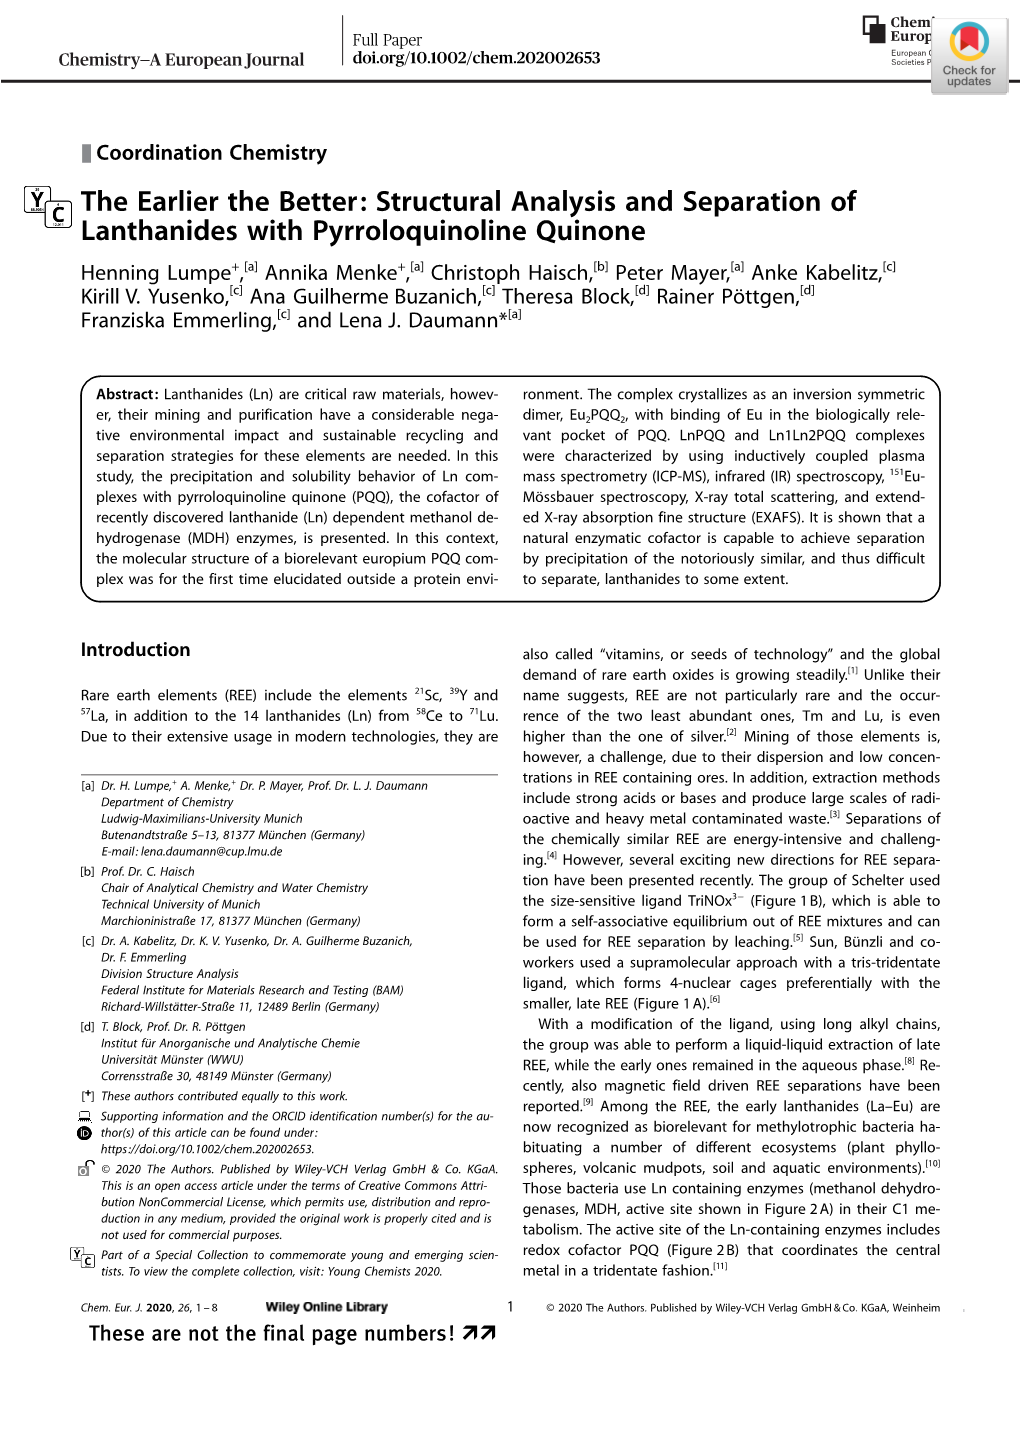 Structural Analysis and Separation of Lanthanides with Pyrroloquinoline